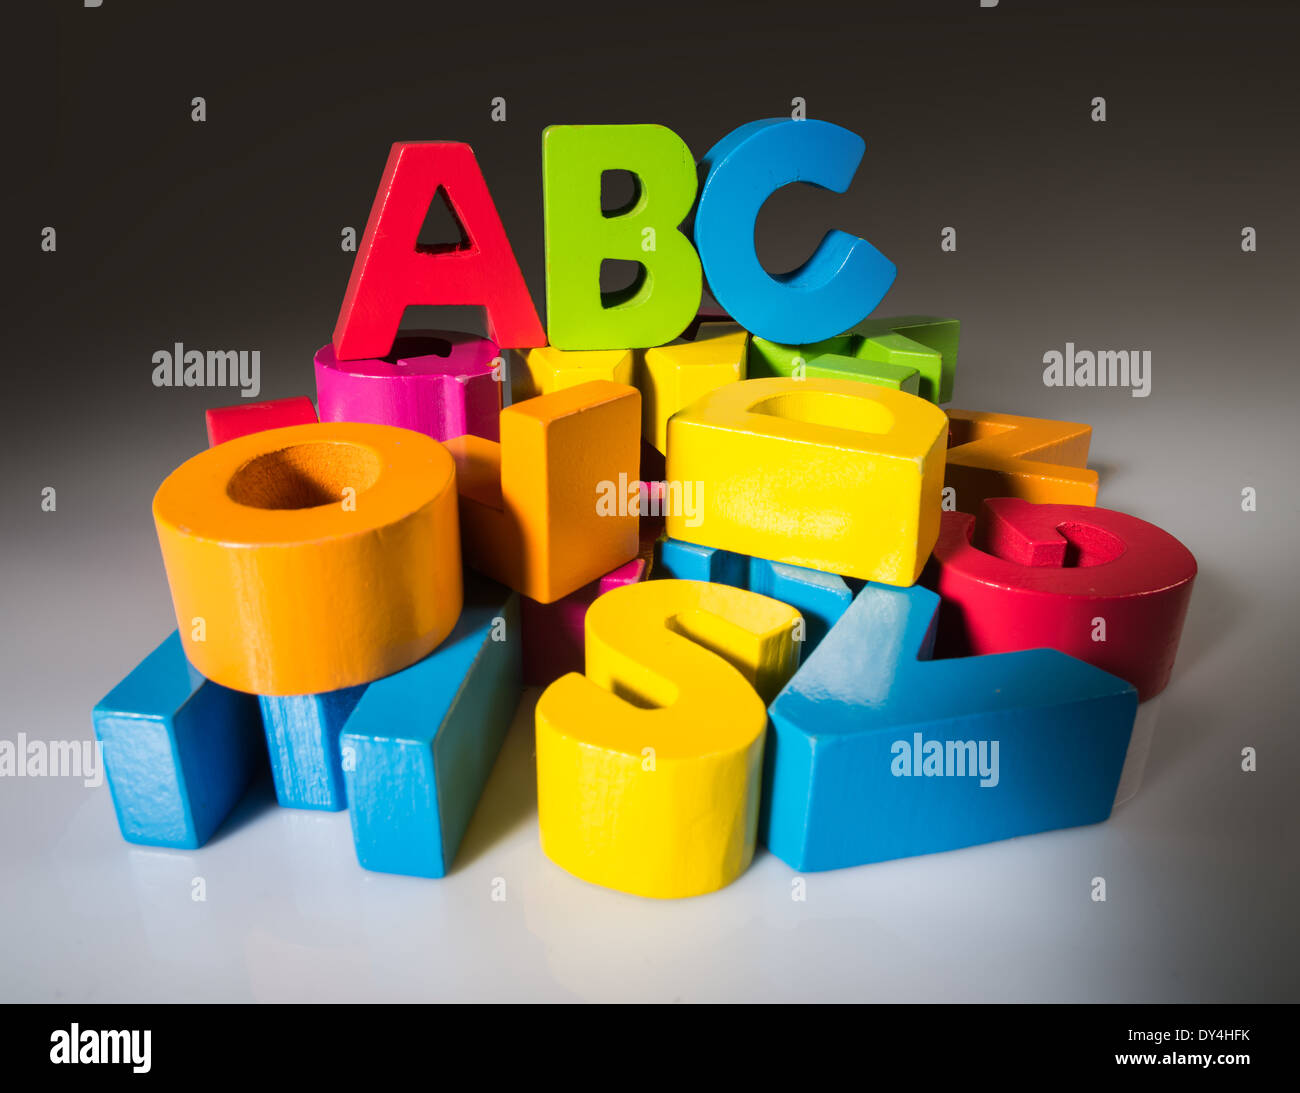 Multicolored letters A B C made of wood. Stock Photo